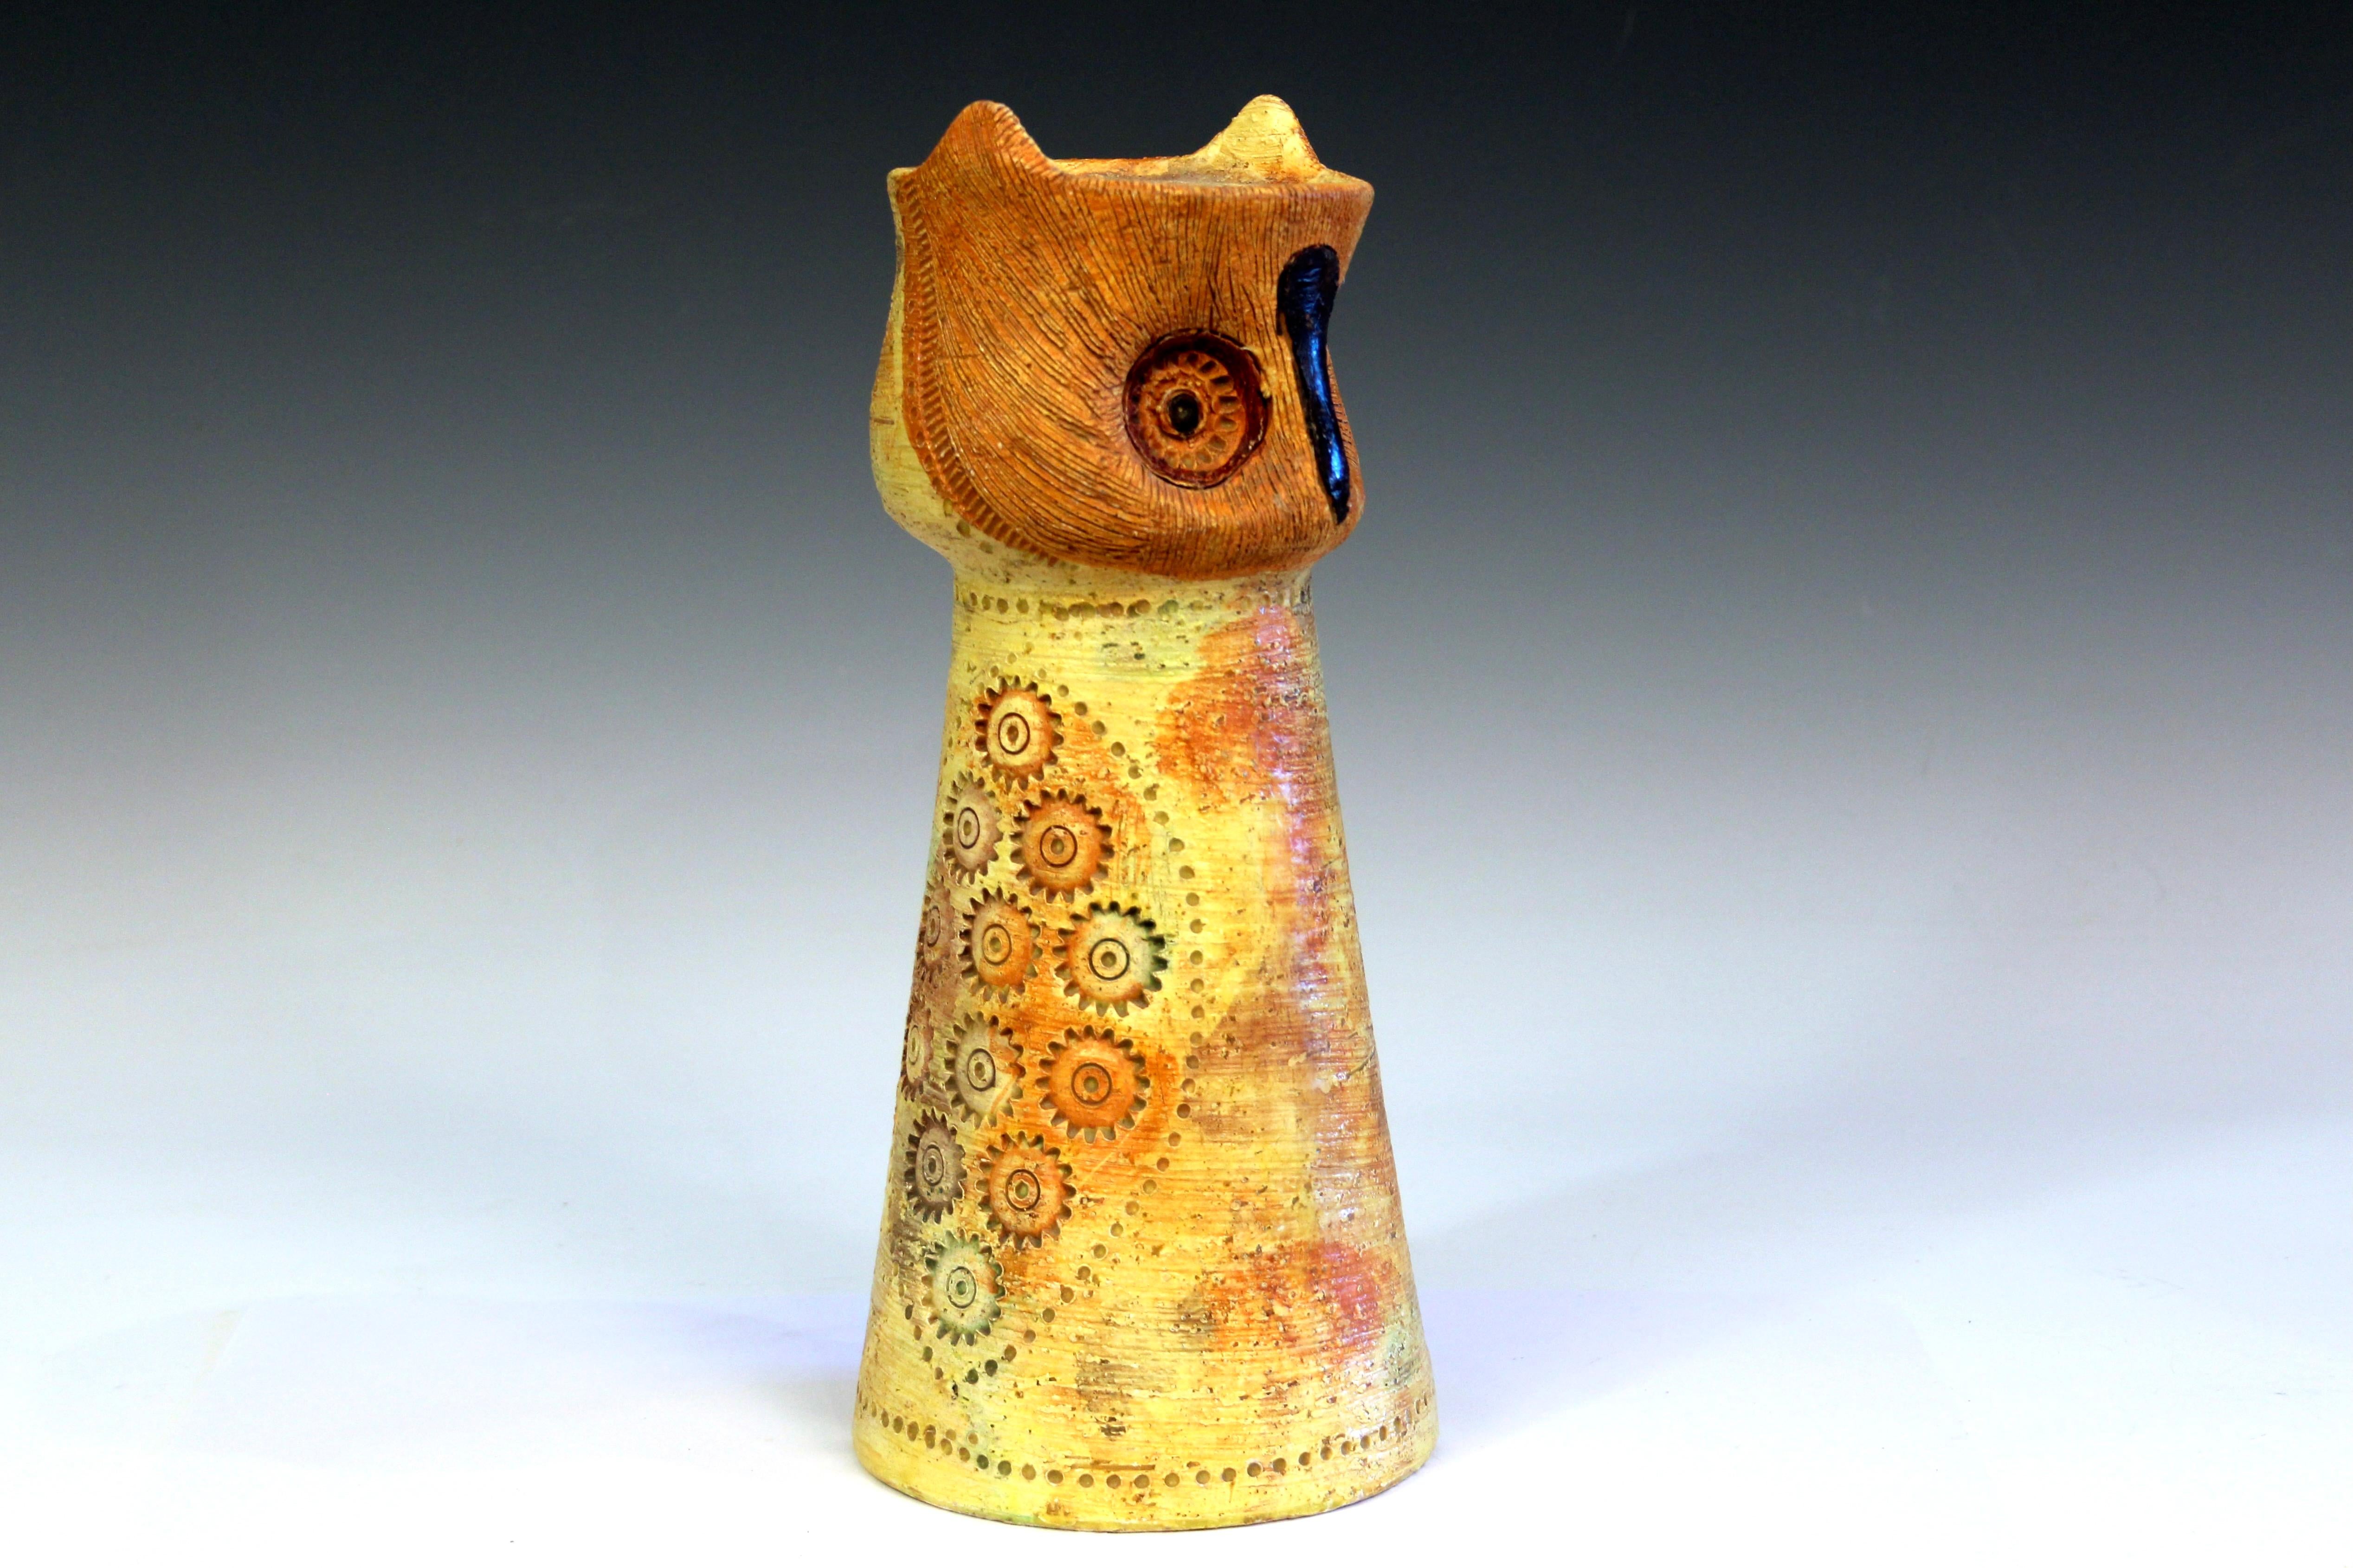 Vintage Bitossi owl figure with rimini wings and borders on a yellow and orange ground, circa 1960's. Measures: 12 1/4